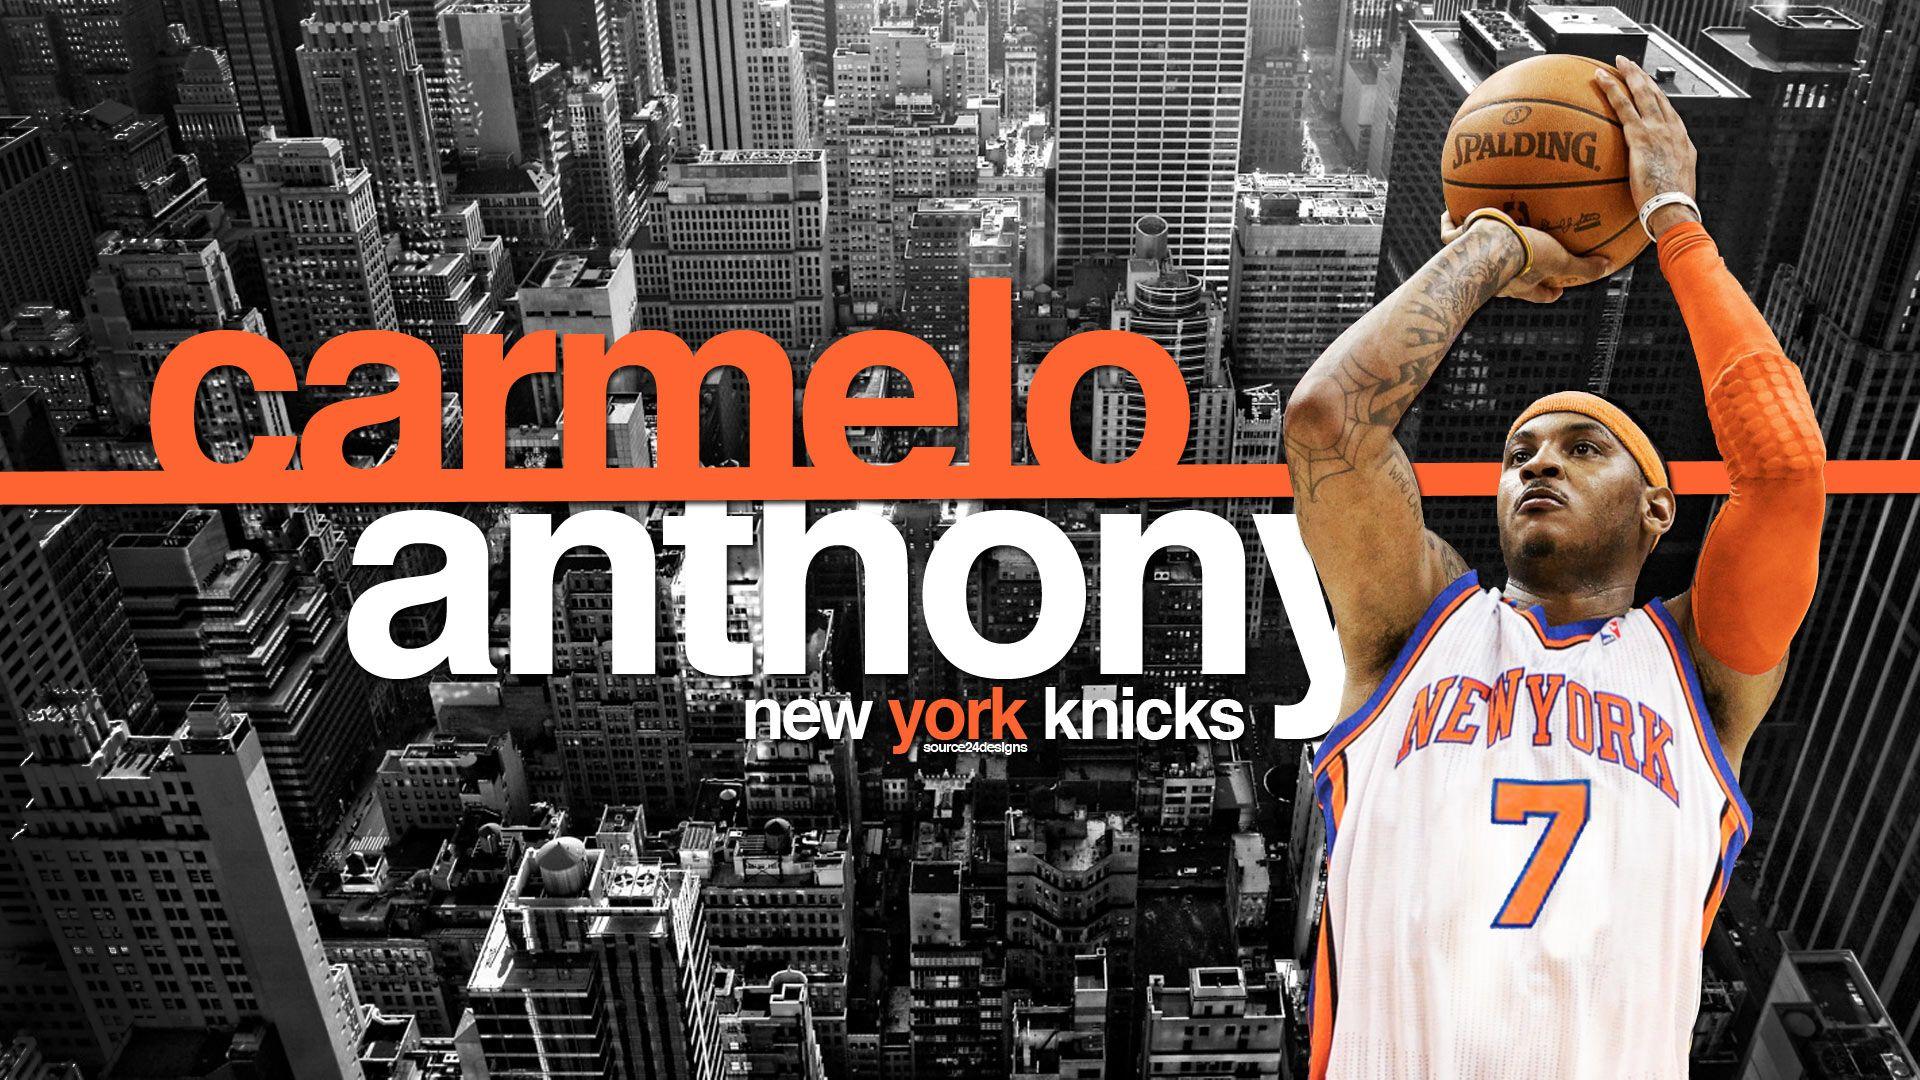 Carmelo Anthony Widescreen Wallpaper  Basketball Wallpapers at